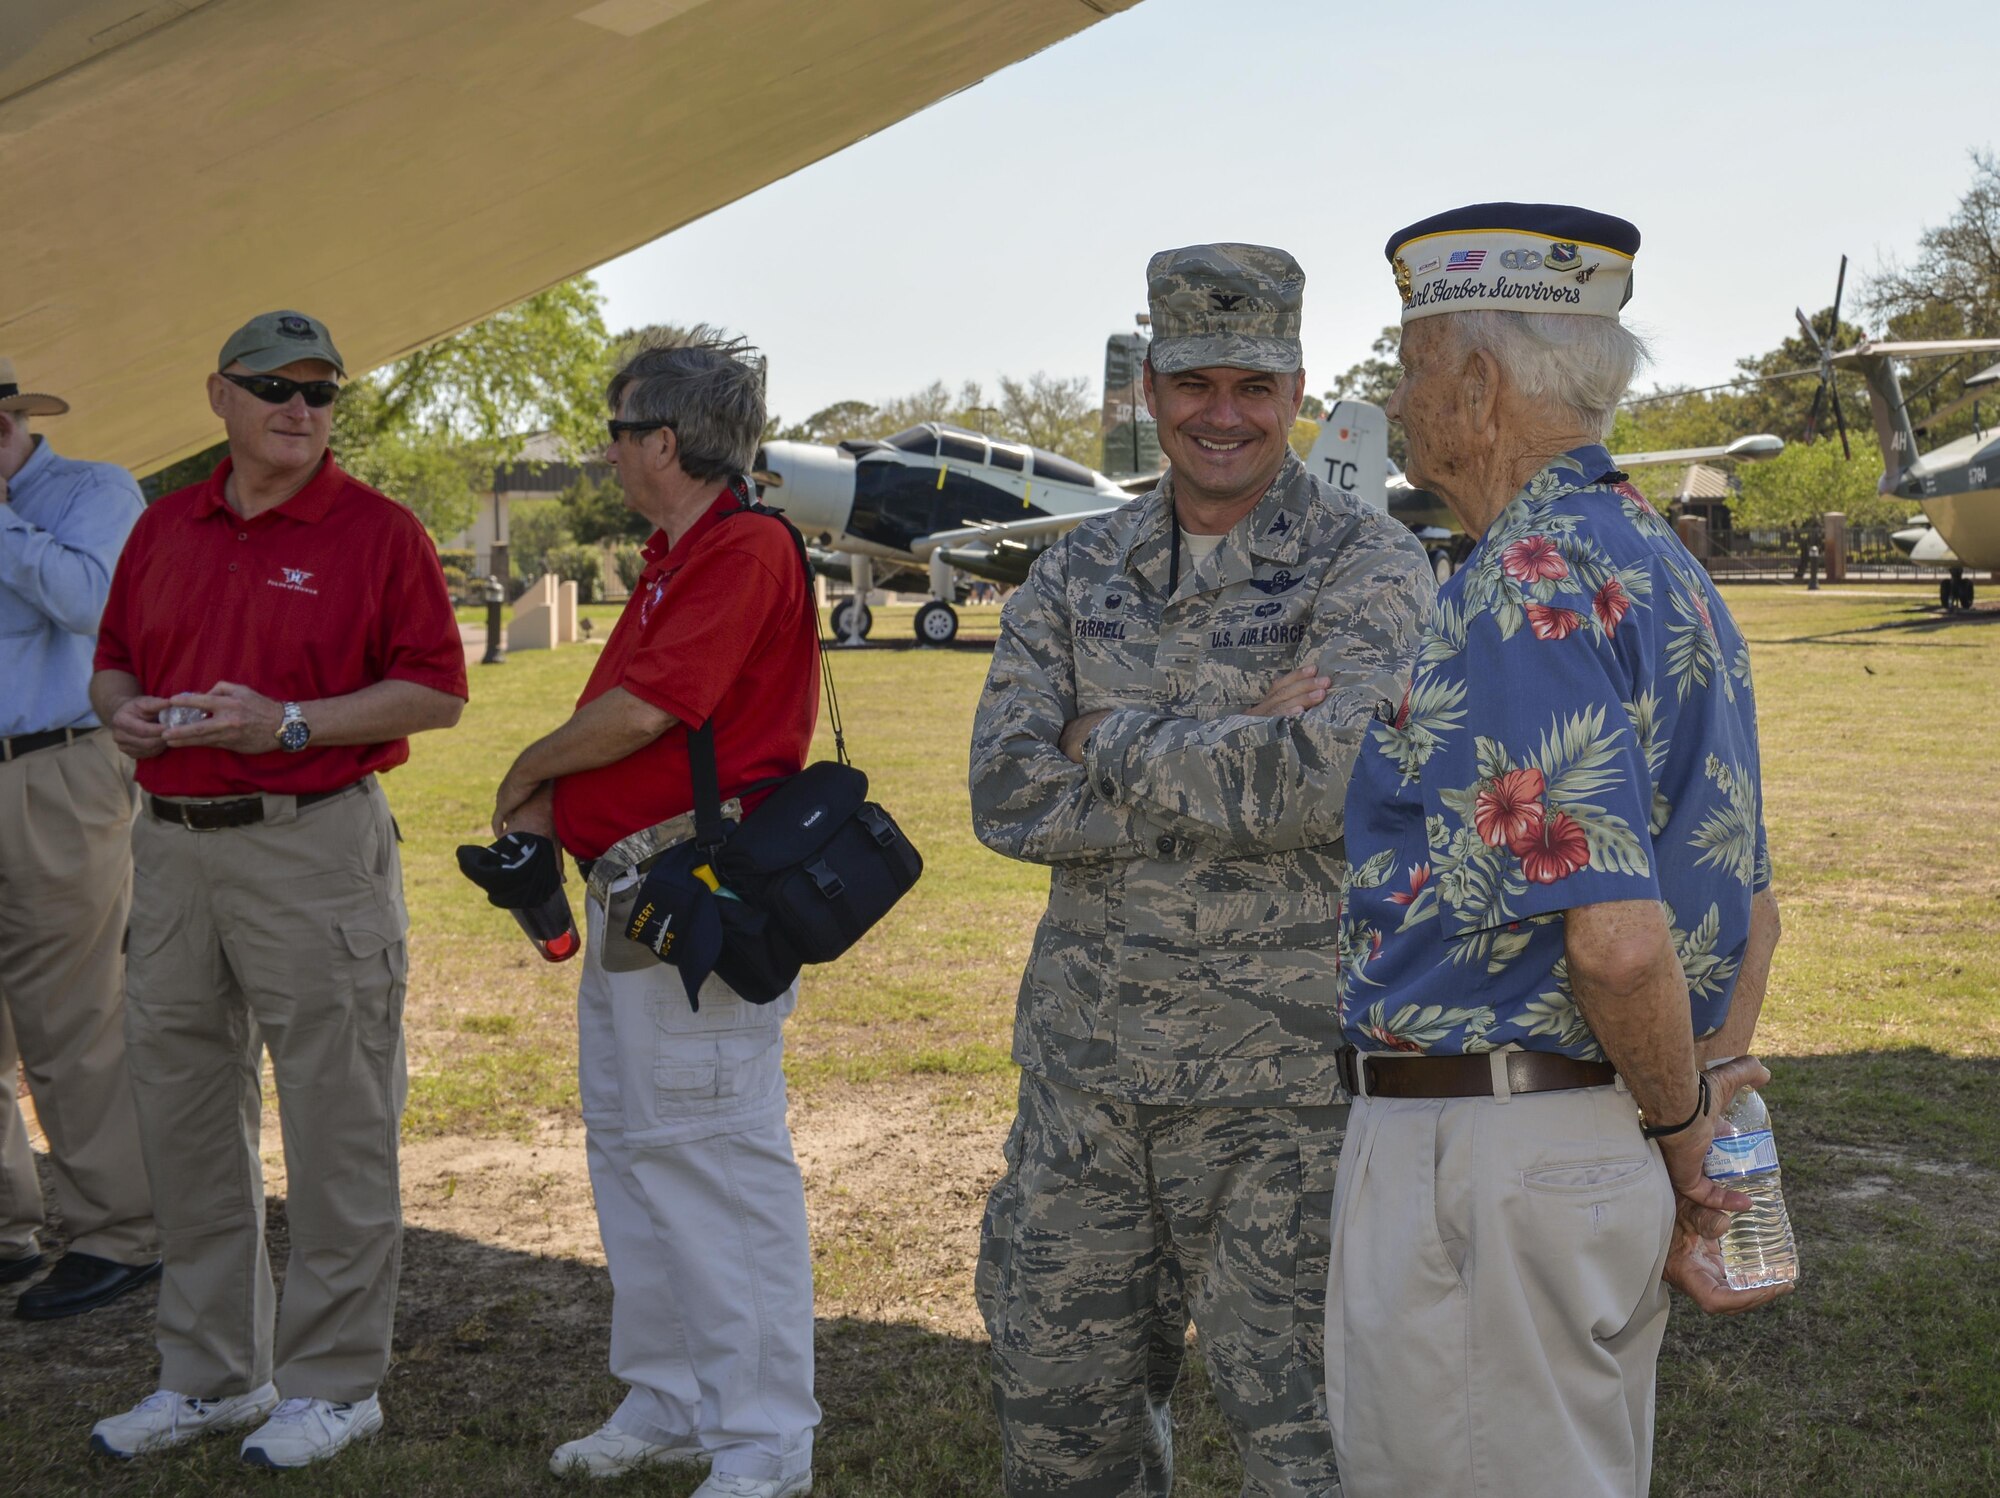 U.S. Air Force Col. Sean Farrell, left, commander of the 1st Special Operations Wing, and U.S. Marine retired Sgt. Maj. Bill Braddock, Pearl Harbor survivor, talk during a tour at Hurlburt Field, Fla., April 5, 2016. During the tour, Braddock and three fellow Pearl Harbor survivors spent time with Air Commandos to discuss their experiences and the differences they see in today’s force. (U.S. Air Force photo by 2nd Lt. Jaclyn Pienkowski)